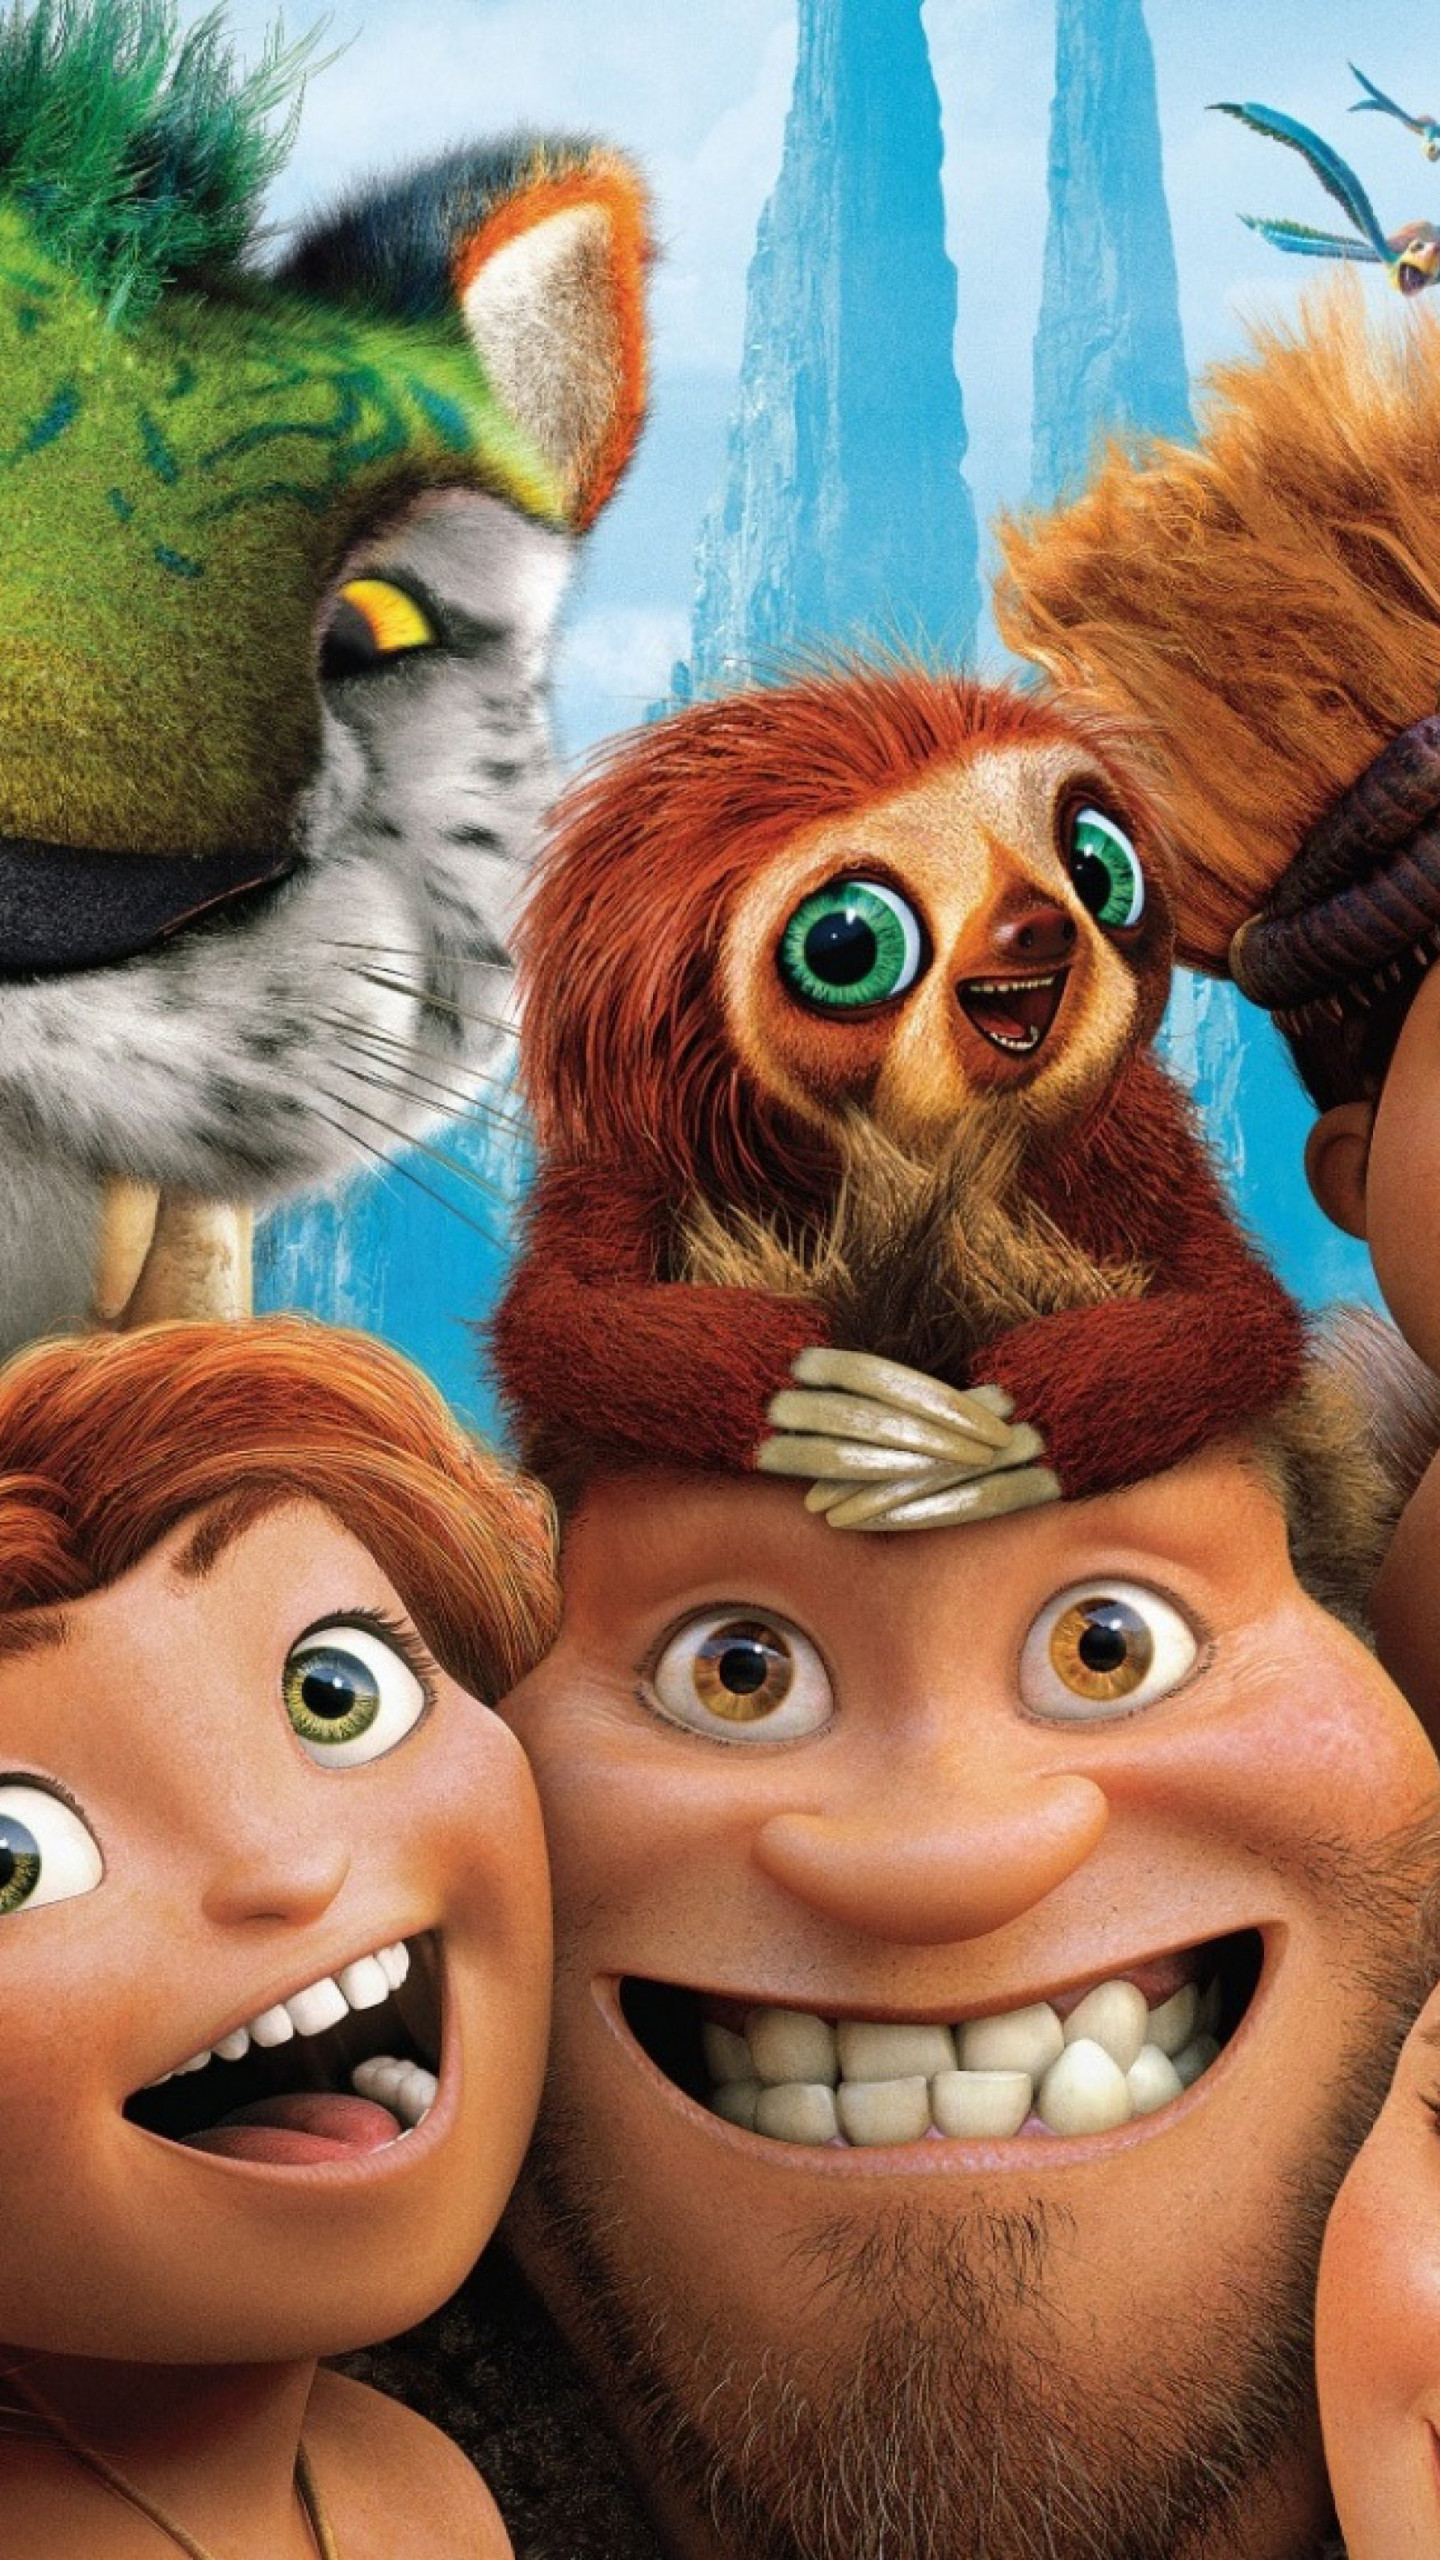 Wallpaper The Croods 2, 5k, best animation movies, Movies #14009